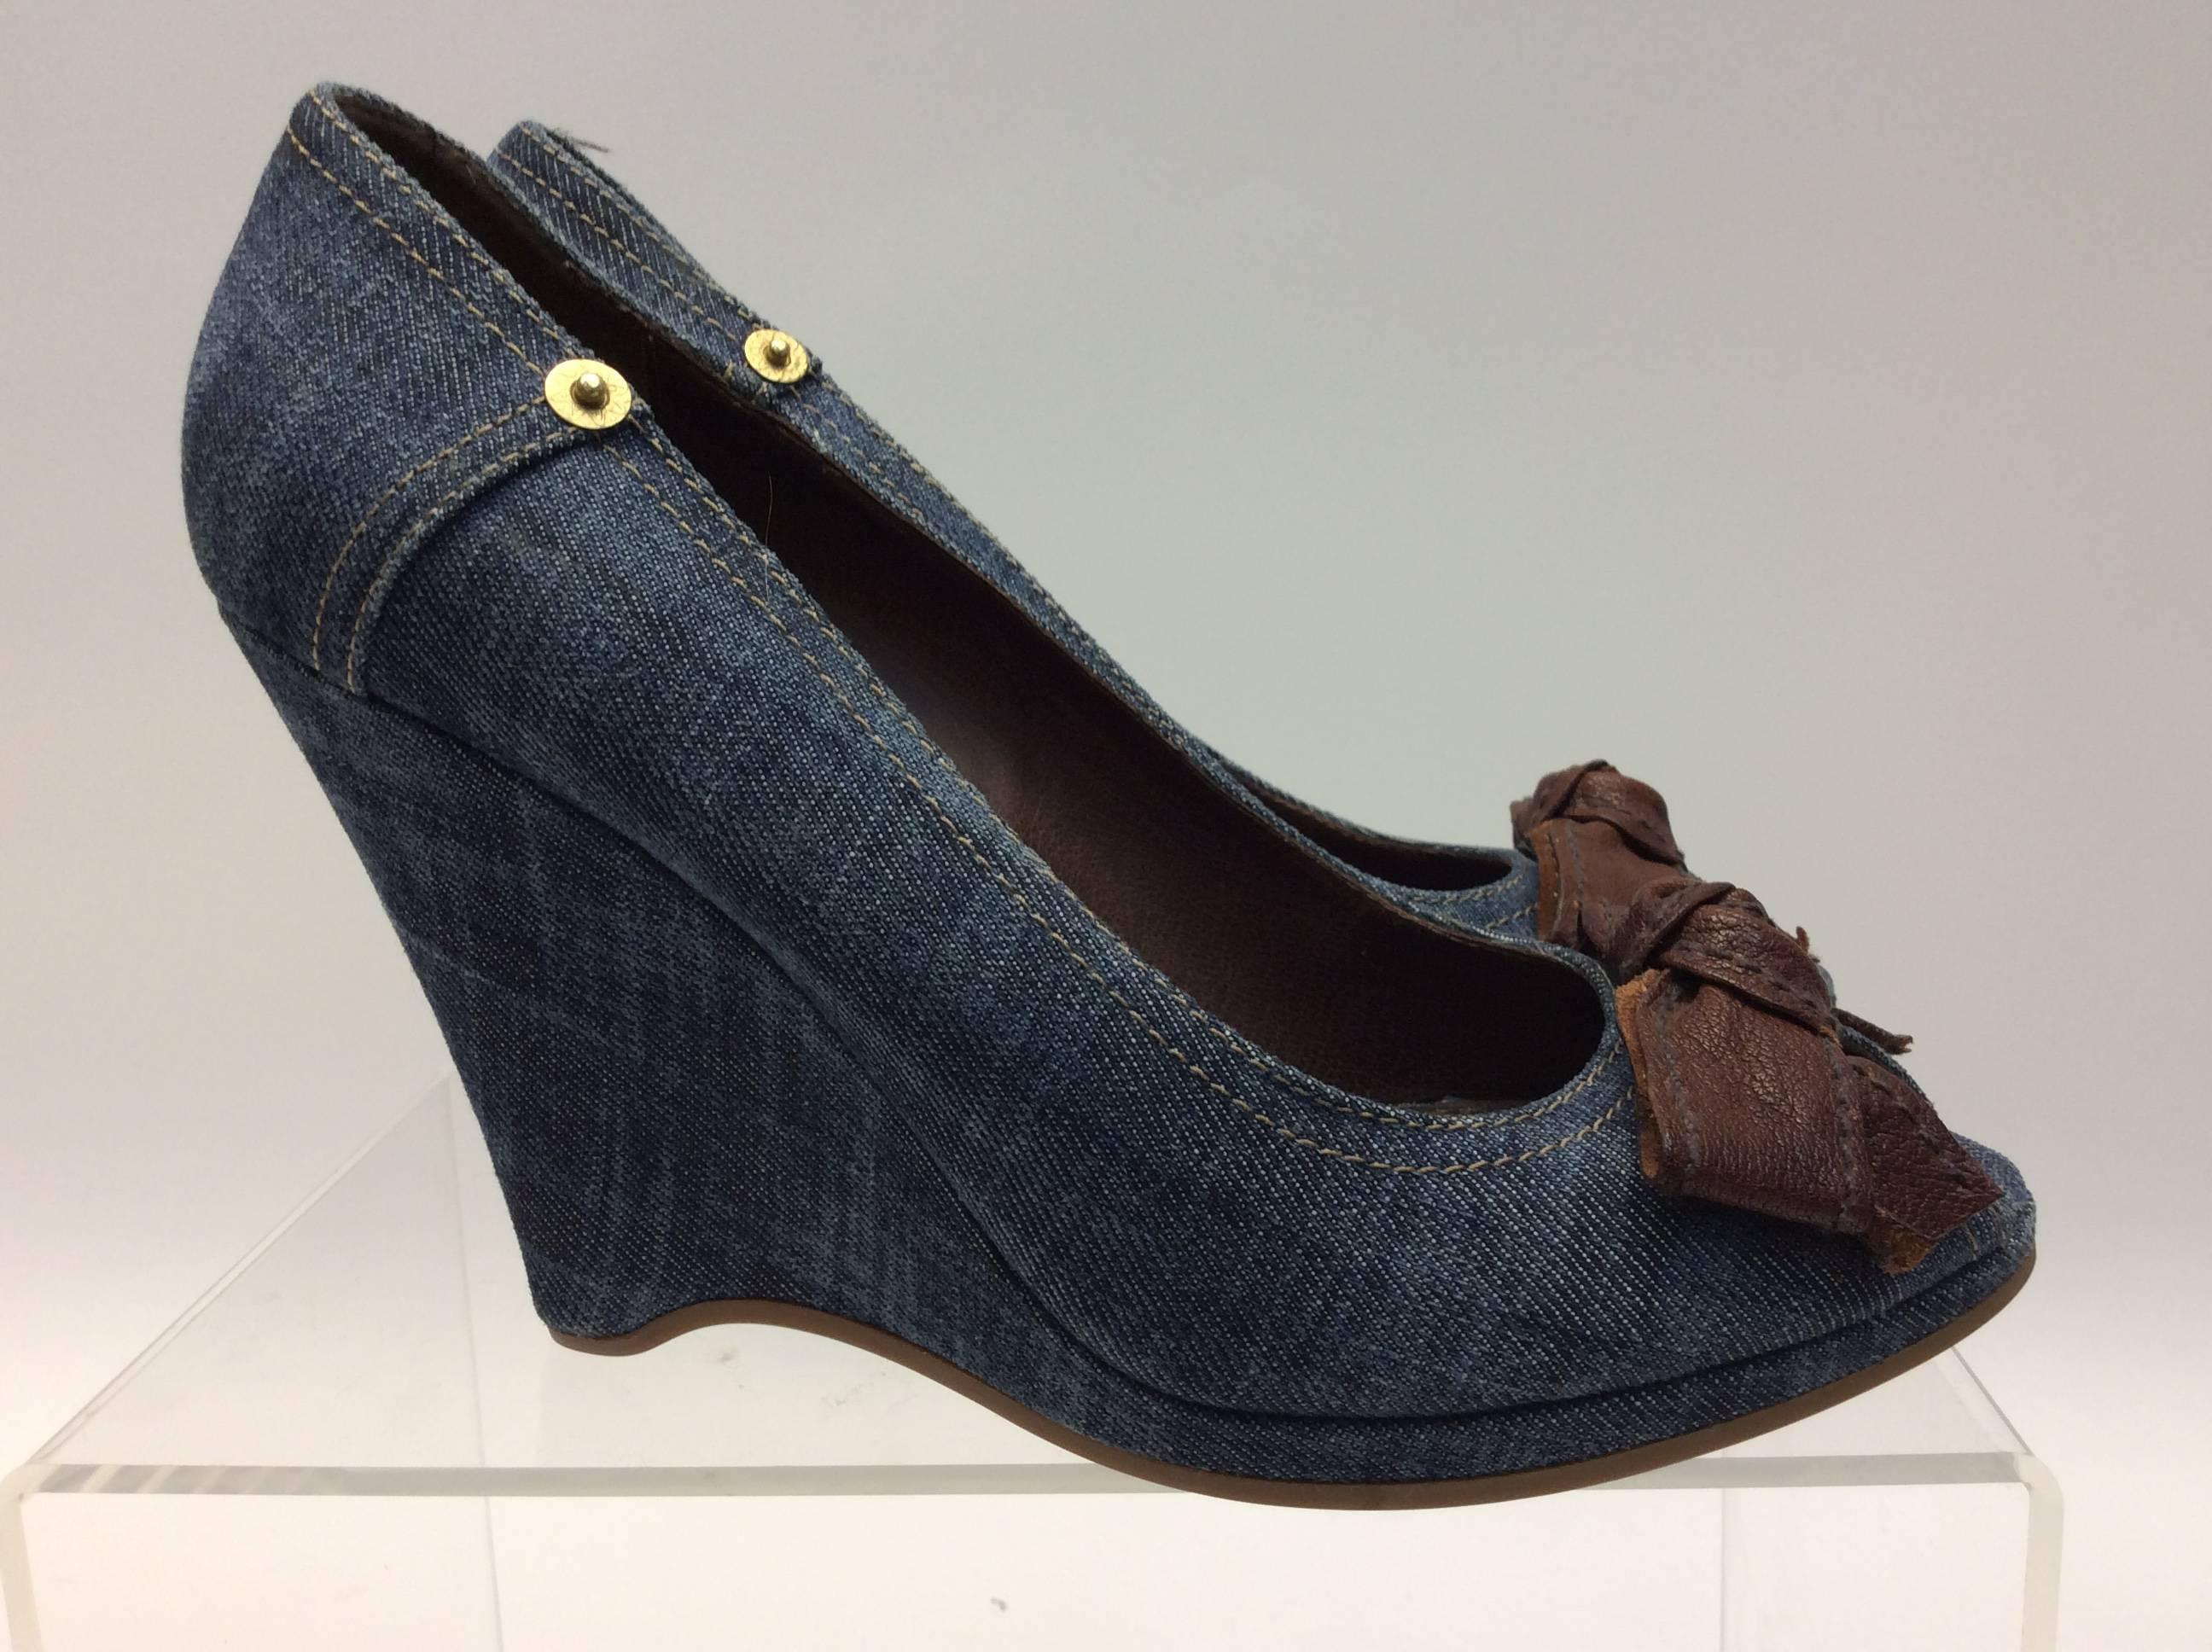 Miu Miu Denim Wedge In Good Condition For Sale In Narberth, PA